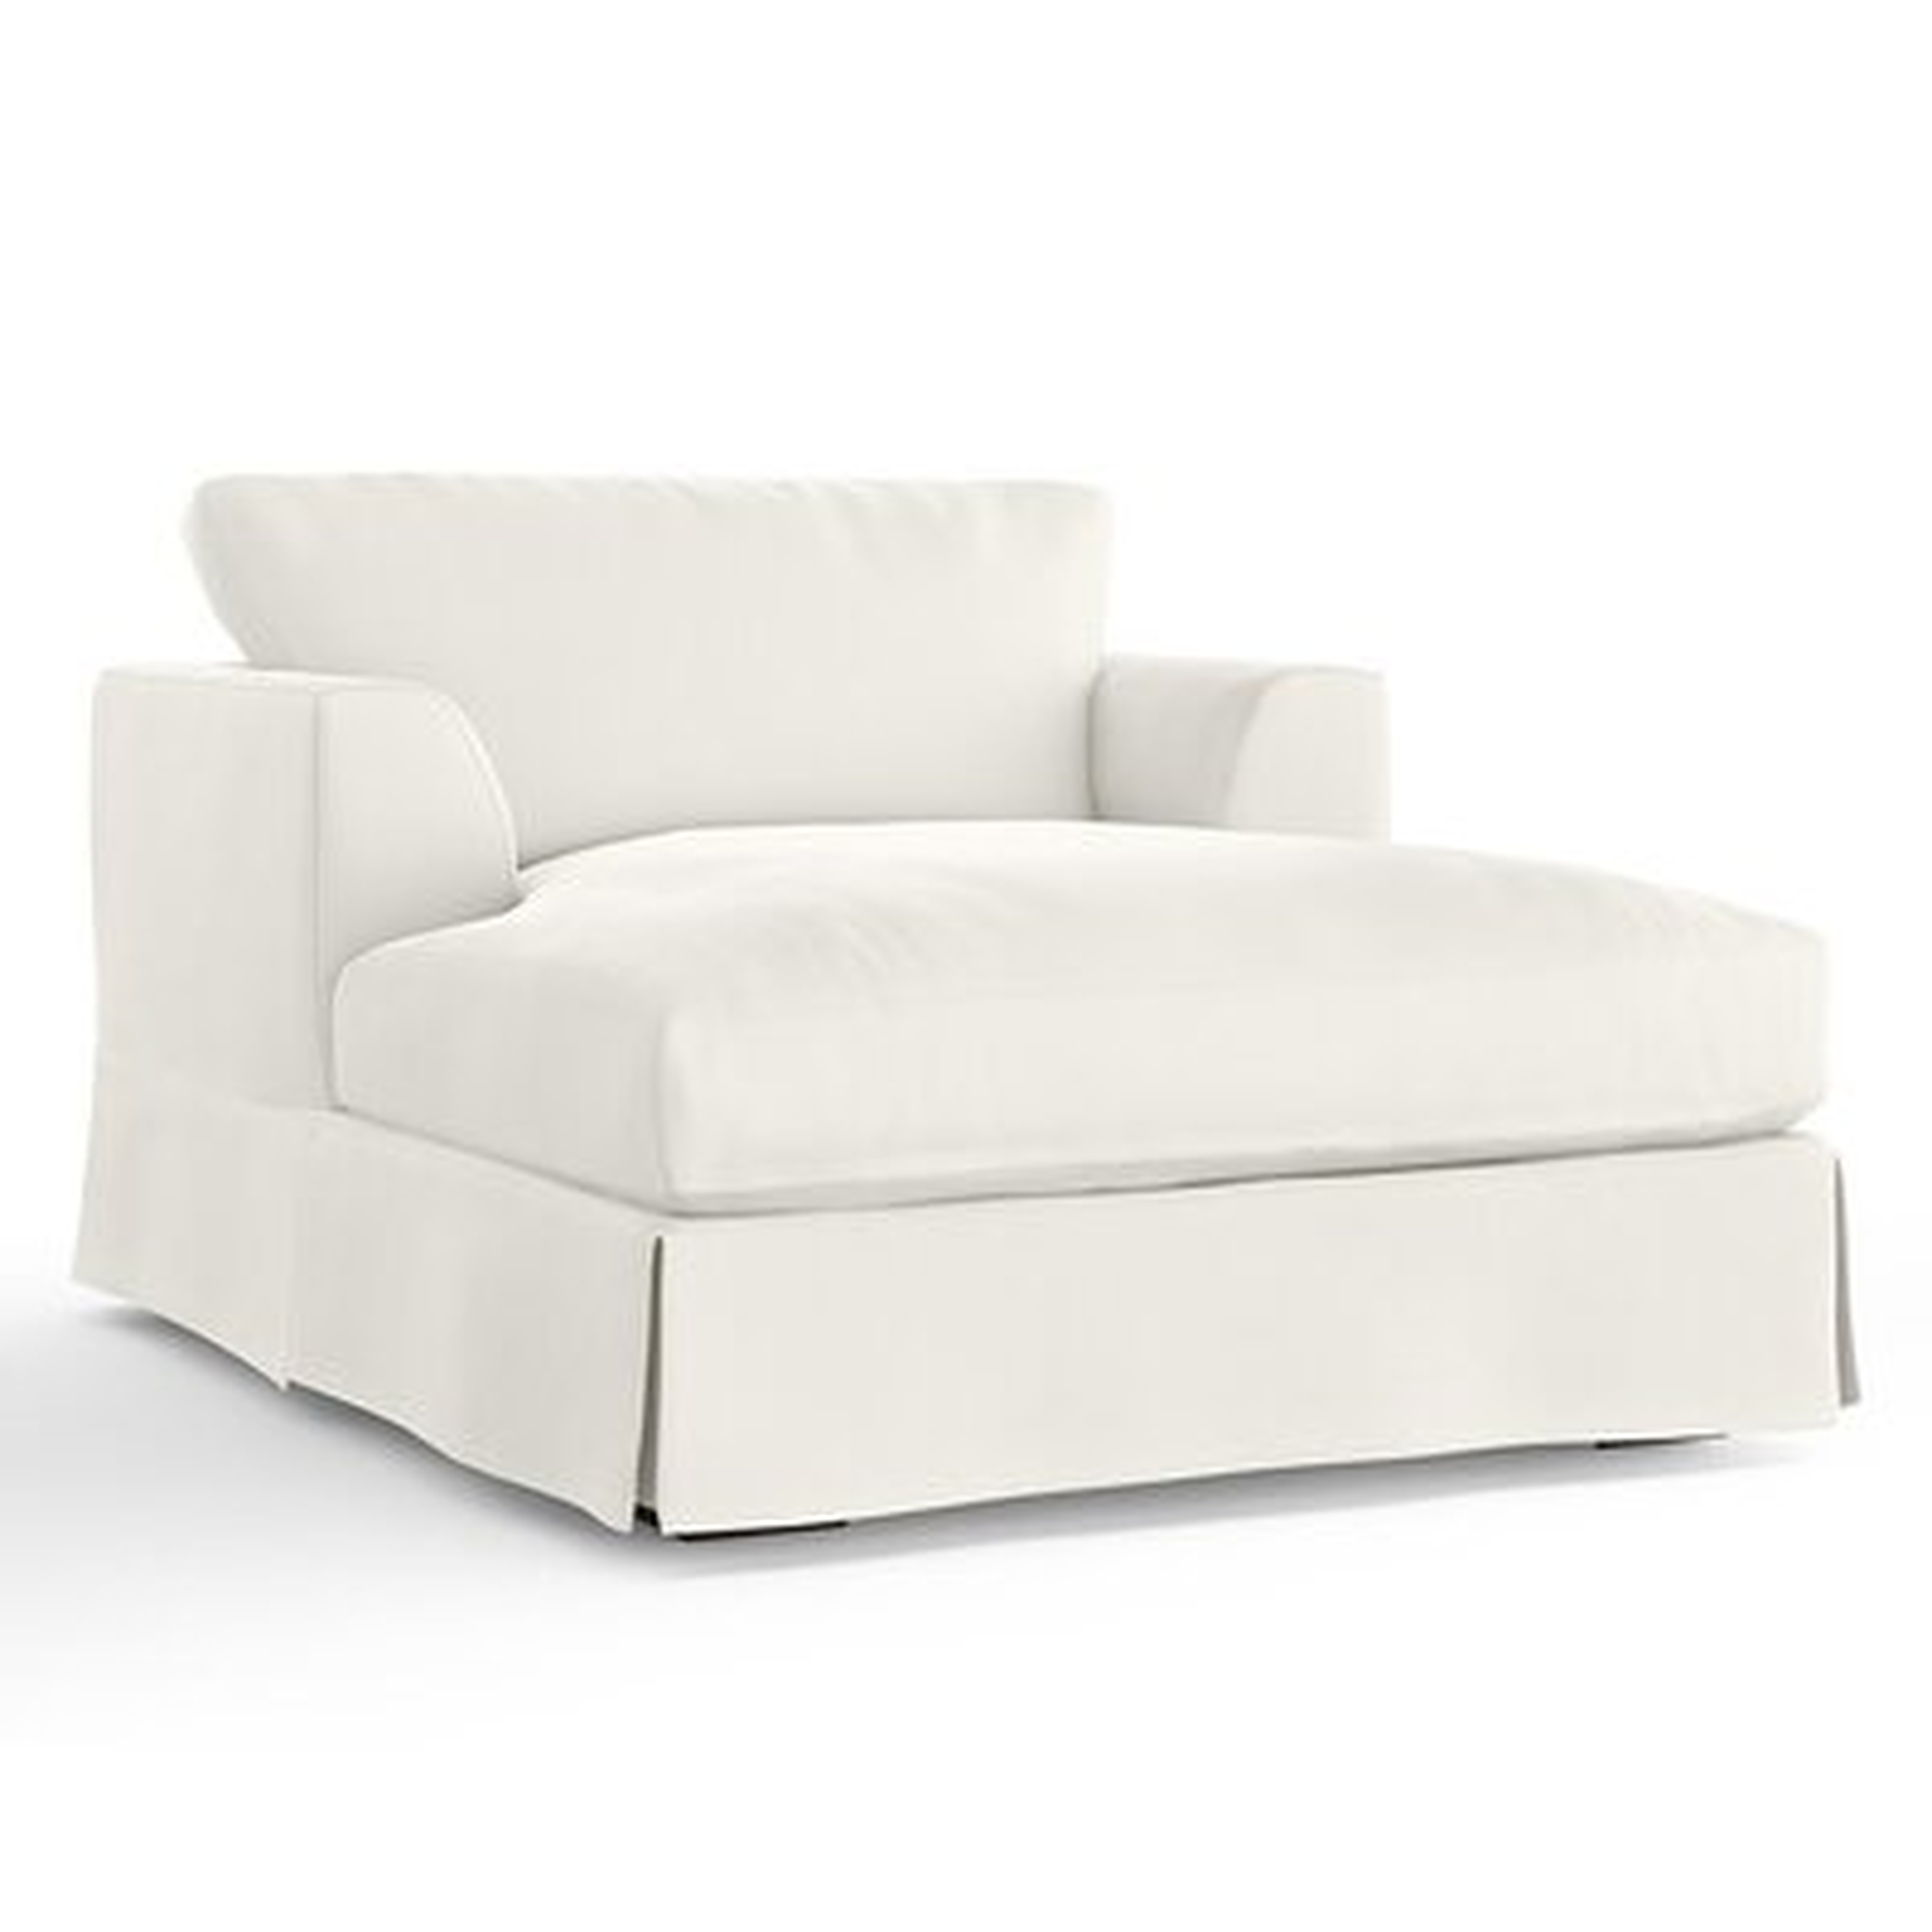 Two Arms Recessed Down Feather Chaise Lounge - Wayfair